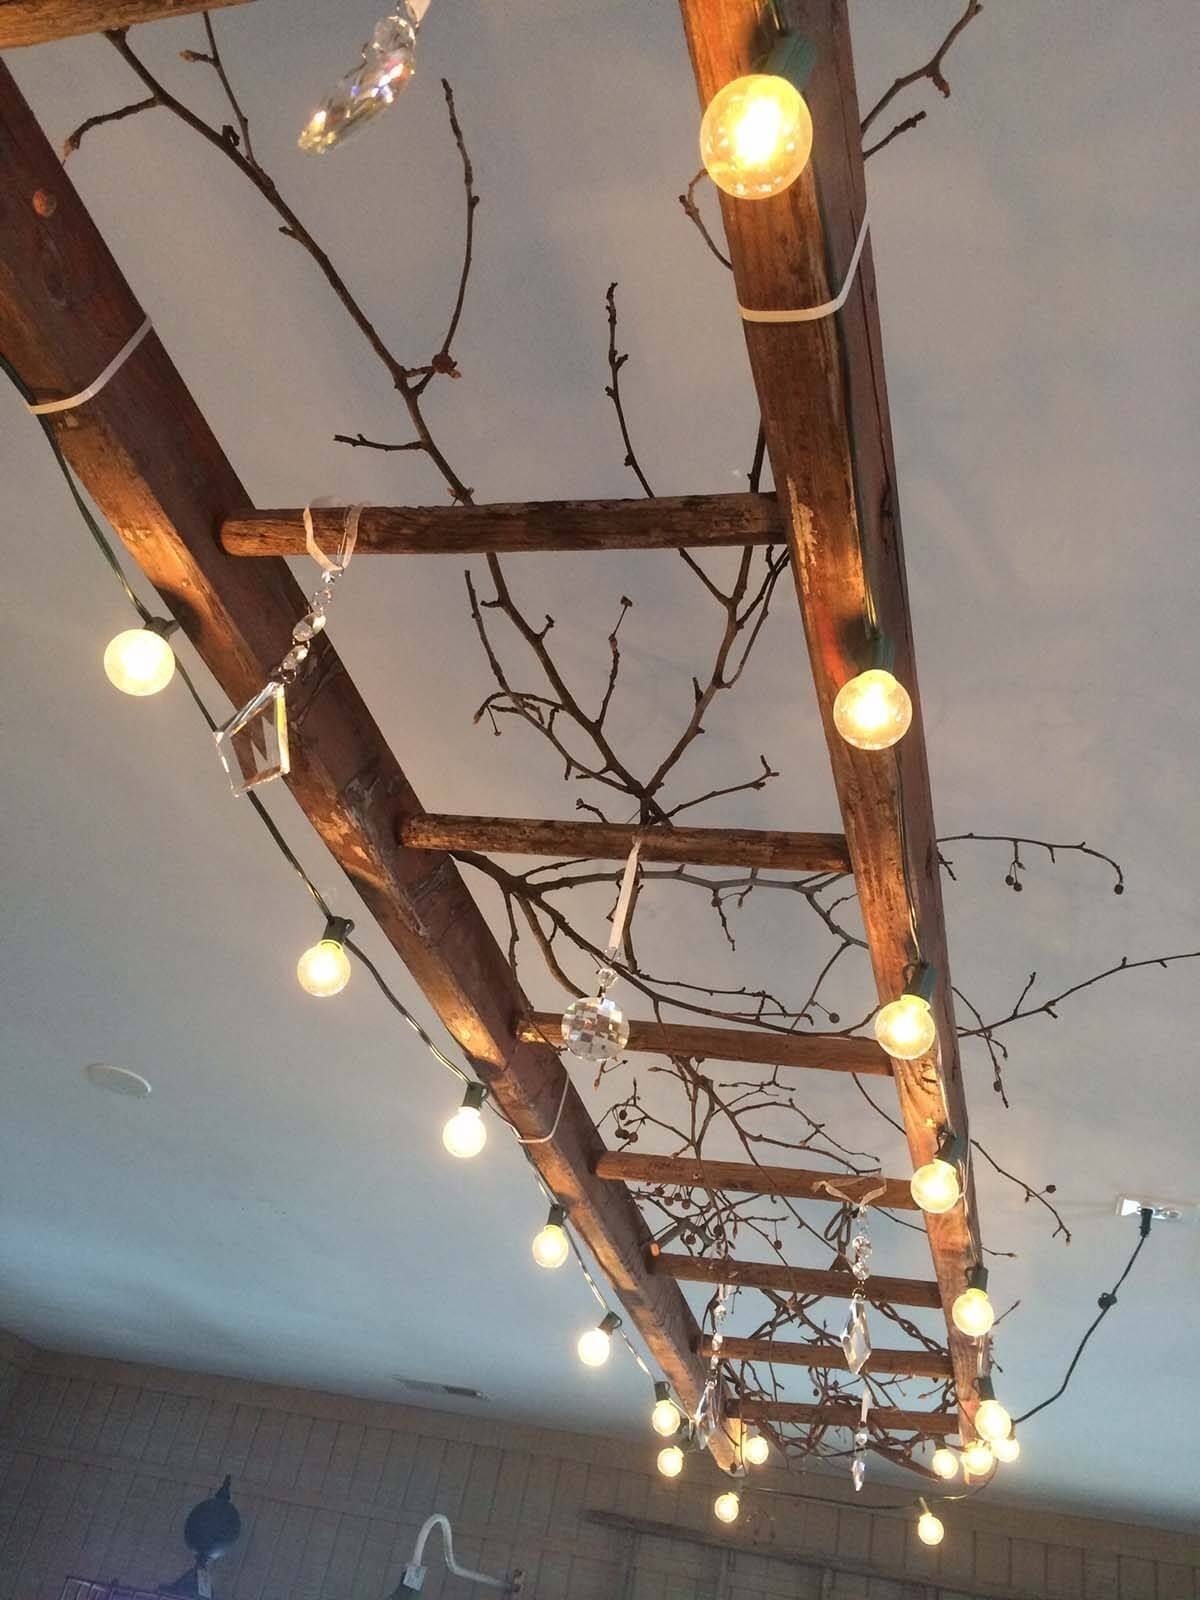 34 Dreamy Diy Vintage Decor Ideas | Lights, House And Remodeling Ideas Intended For Diy Outdoor Ceiling Lights (View 9 of 15)